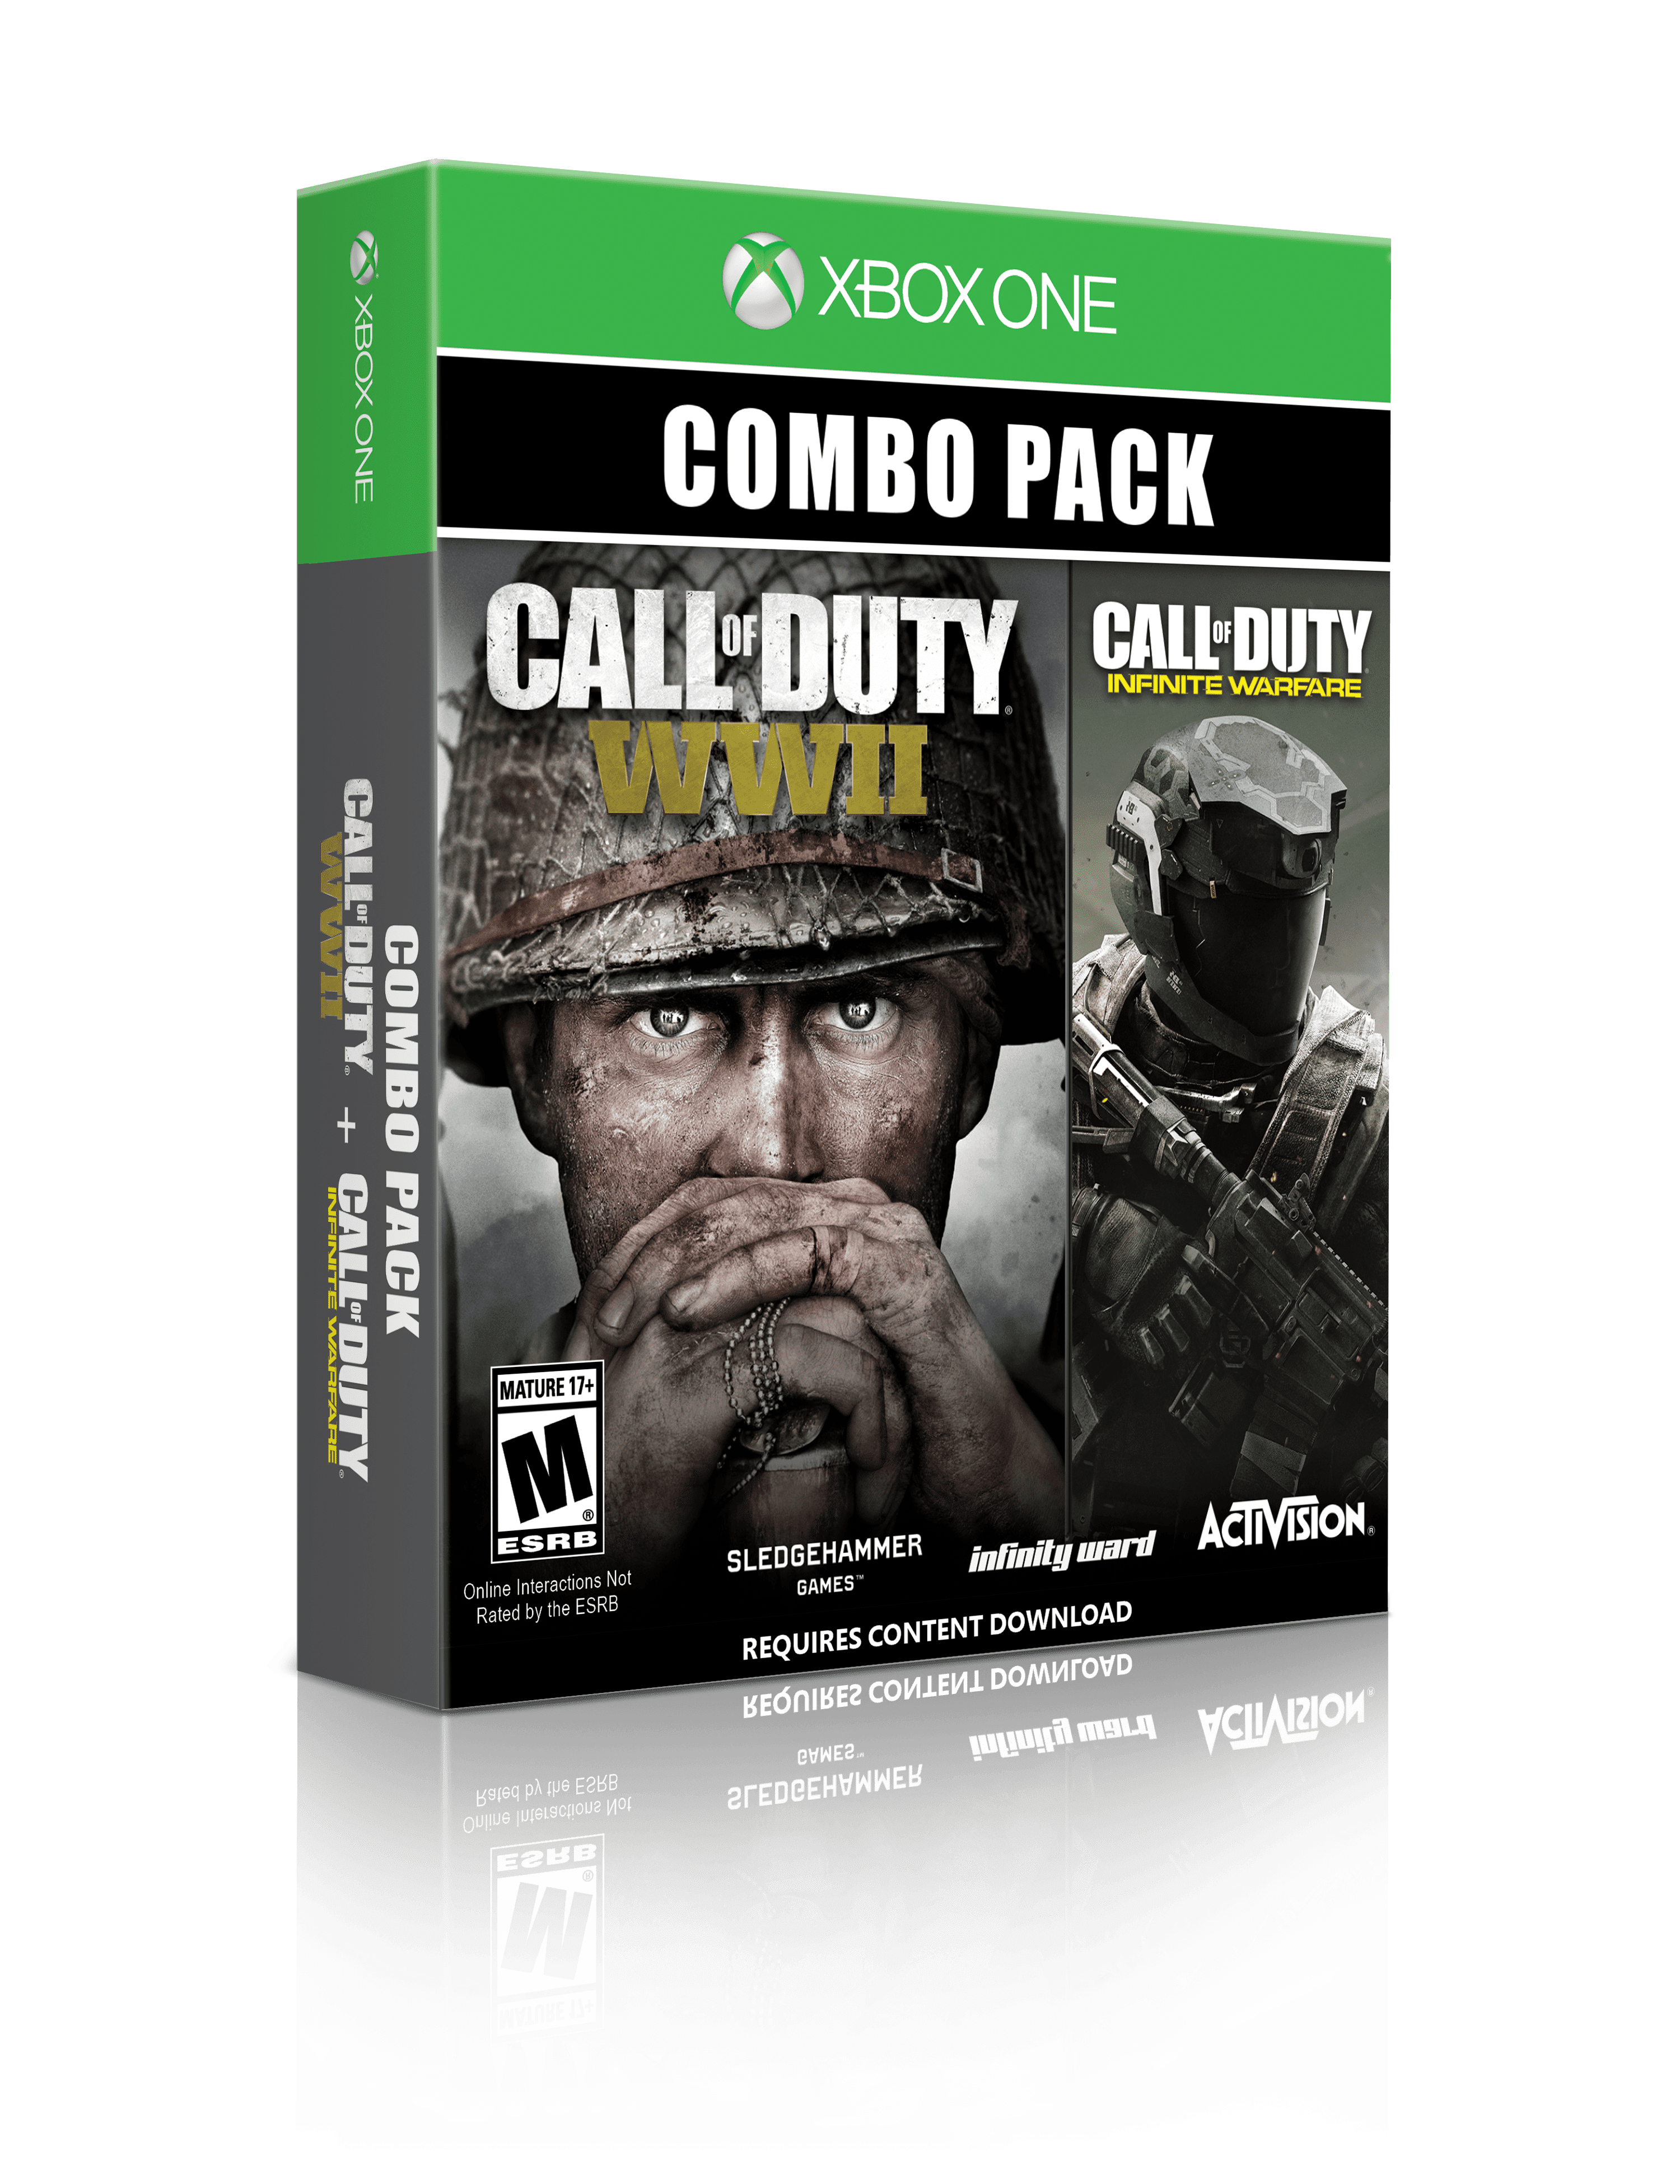 Call of Duty: WWII - Xbox One from 9,890 Ft - Console Game